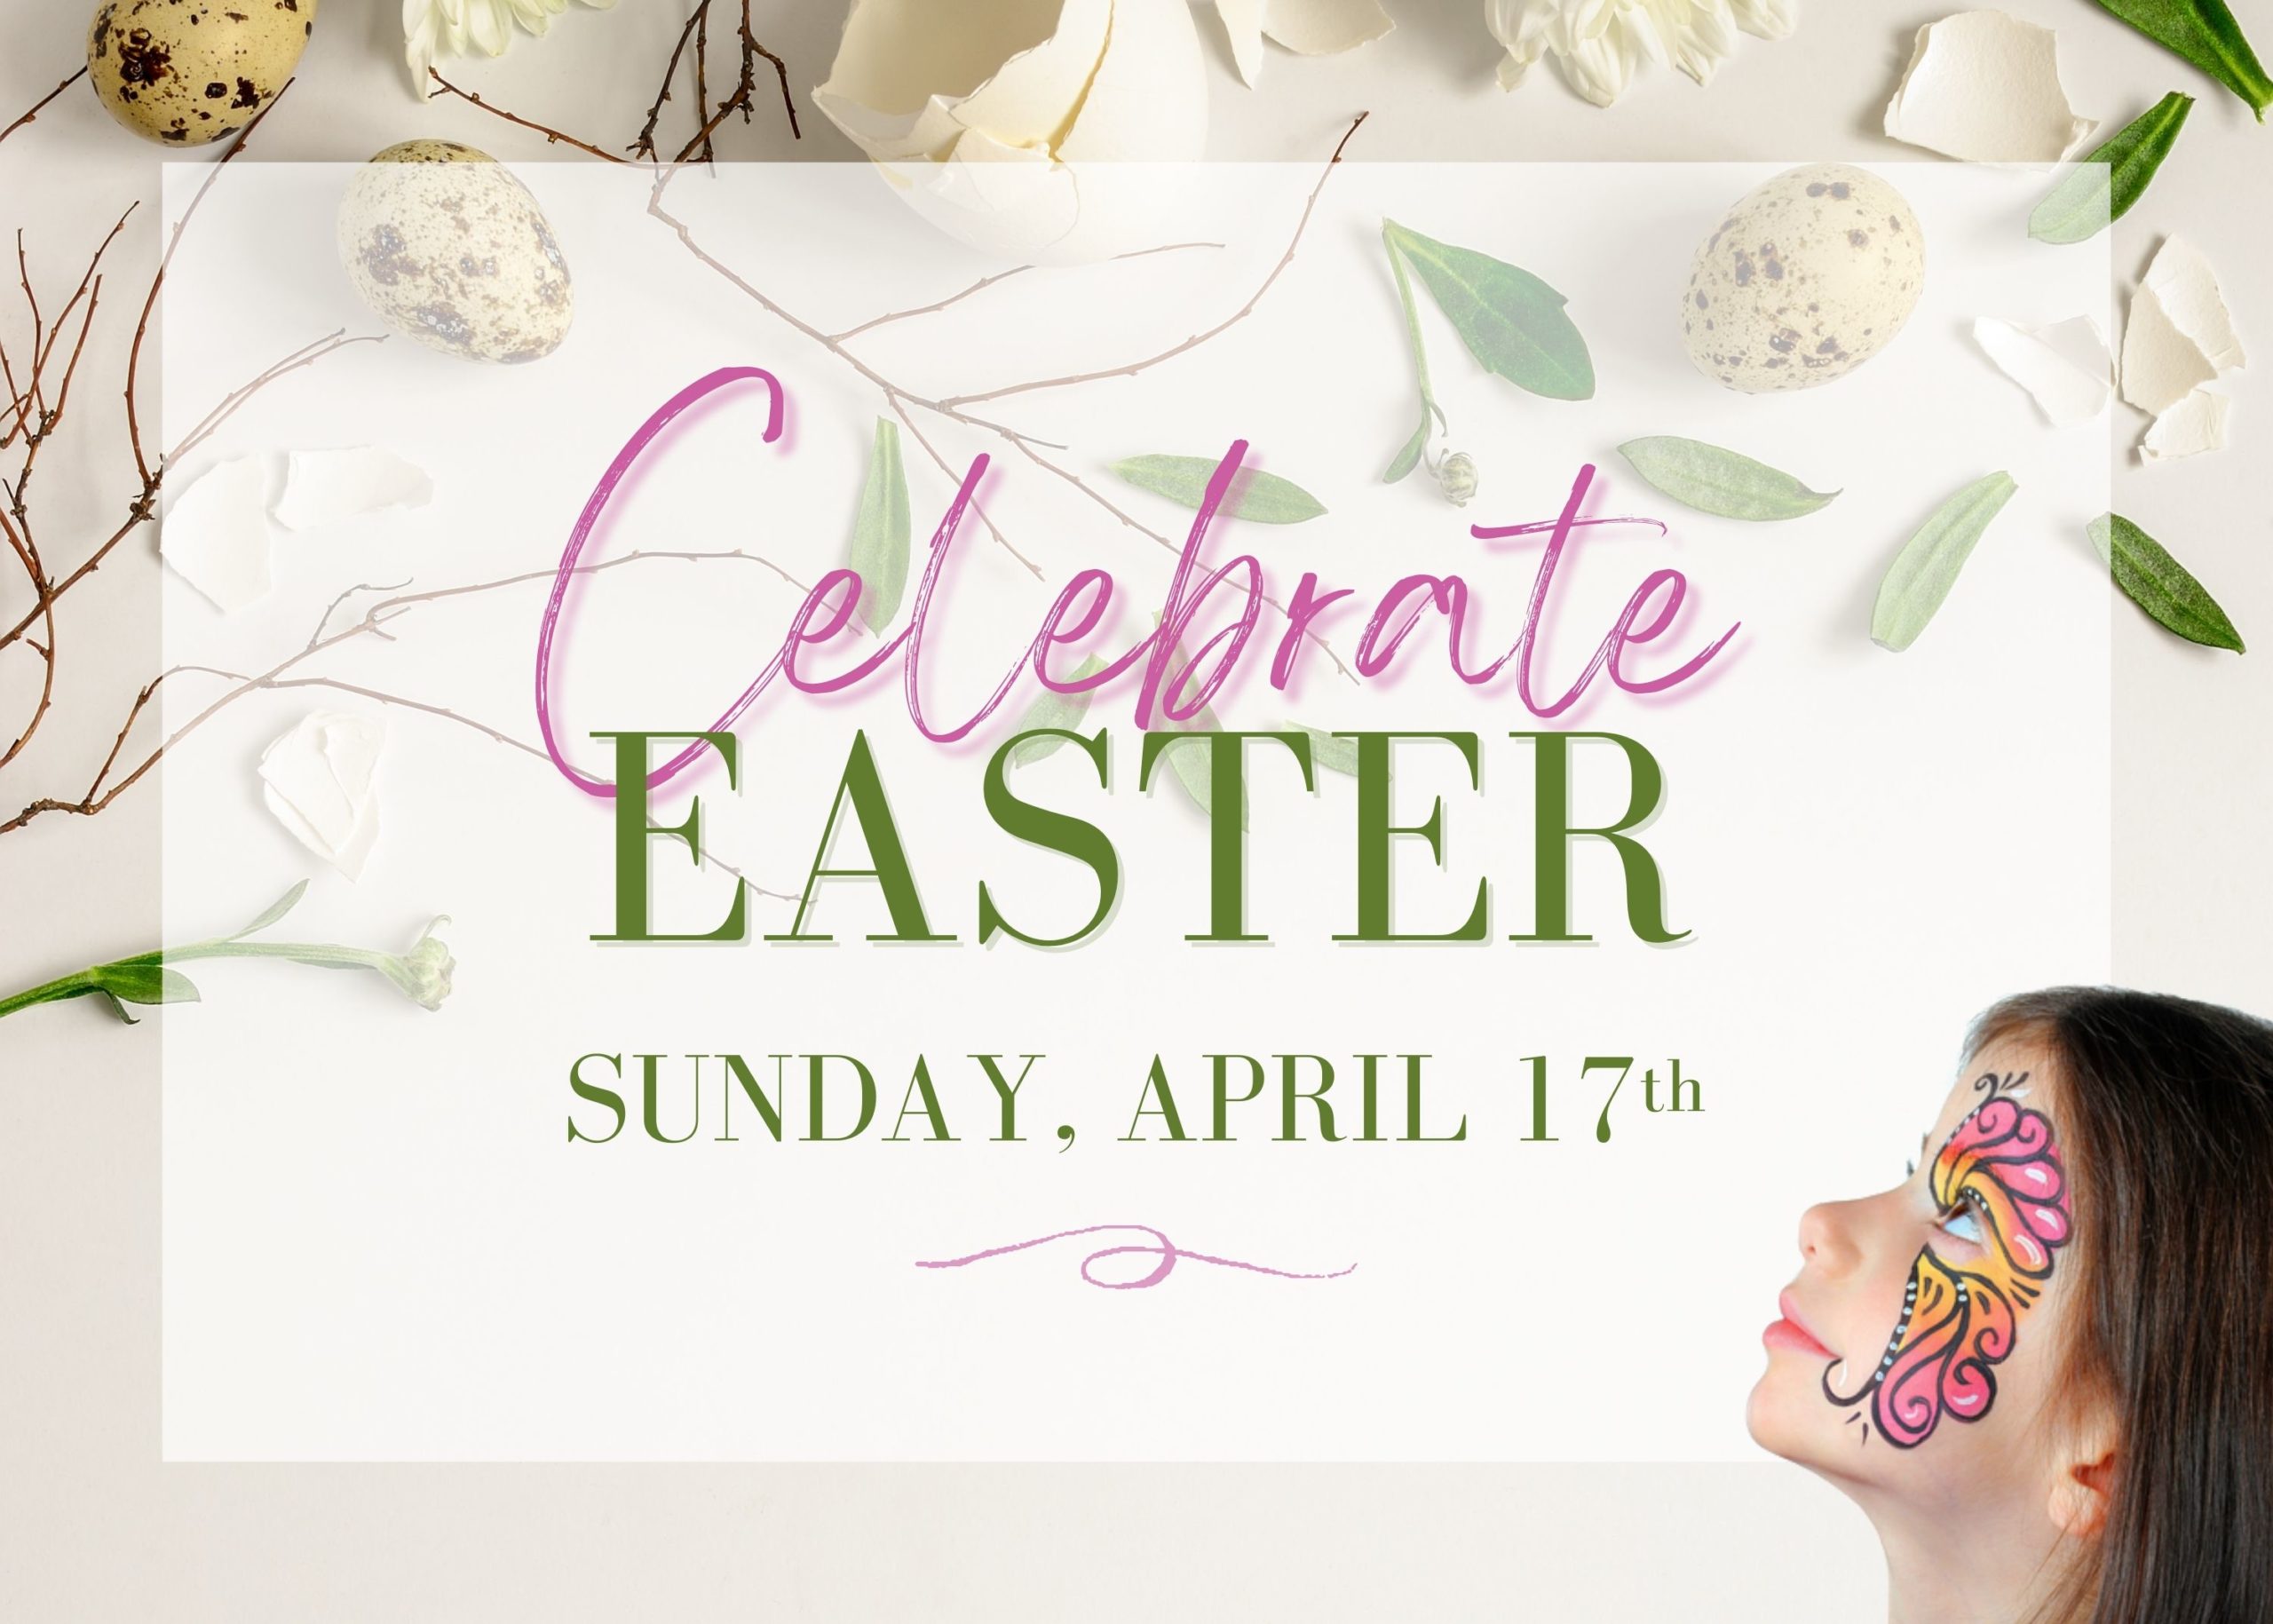 Your Easter celebration around our table!